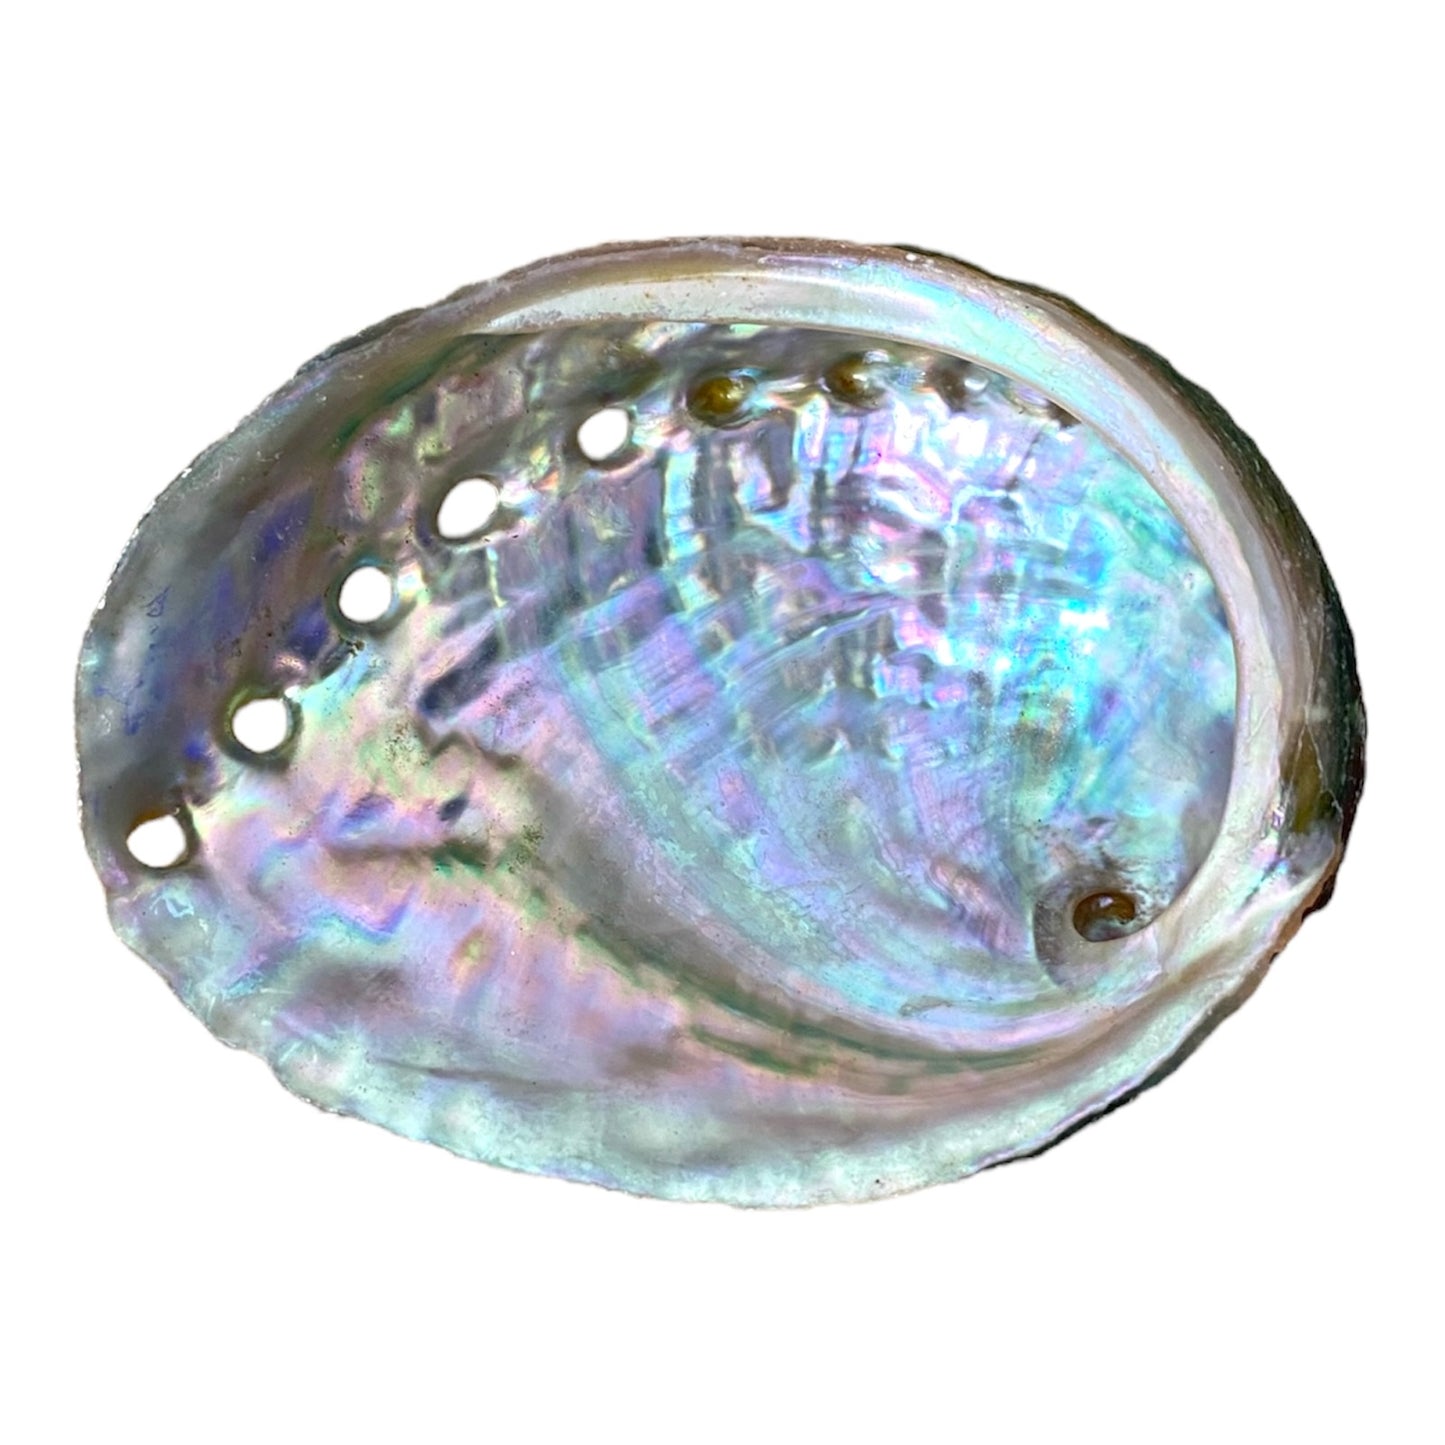 NessaStores 20 Abalone Shells 2.5 to 3.5 Inches | Beautiful All Natural Smudge Bowl - Perfect for Smudge Sticks, Incense Sticks and a Sage Smudge Kit. #JC-020